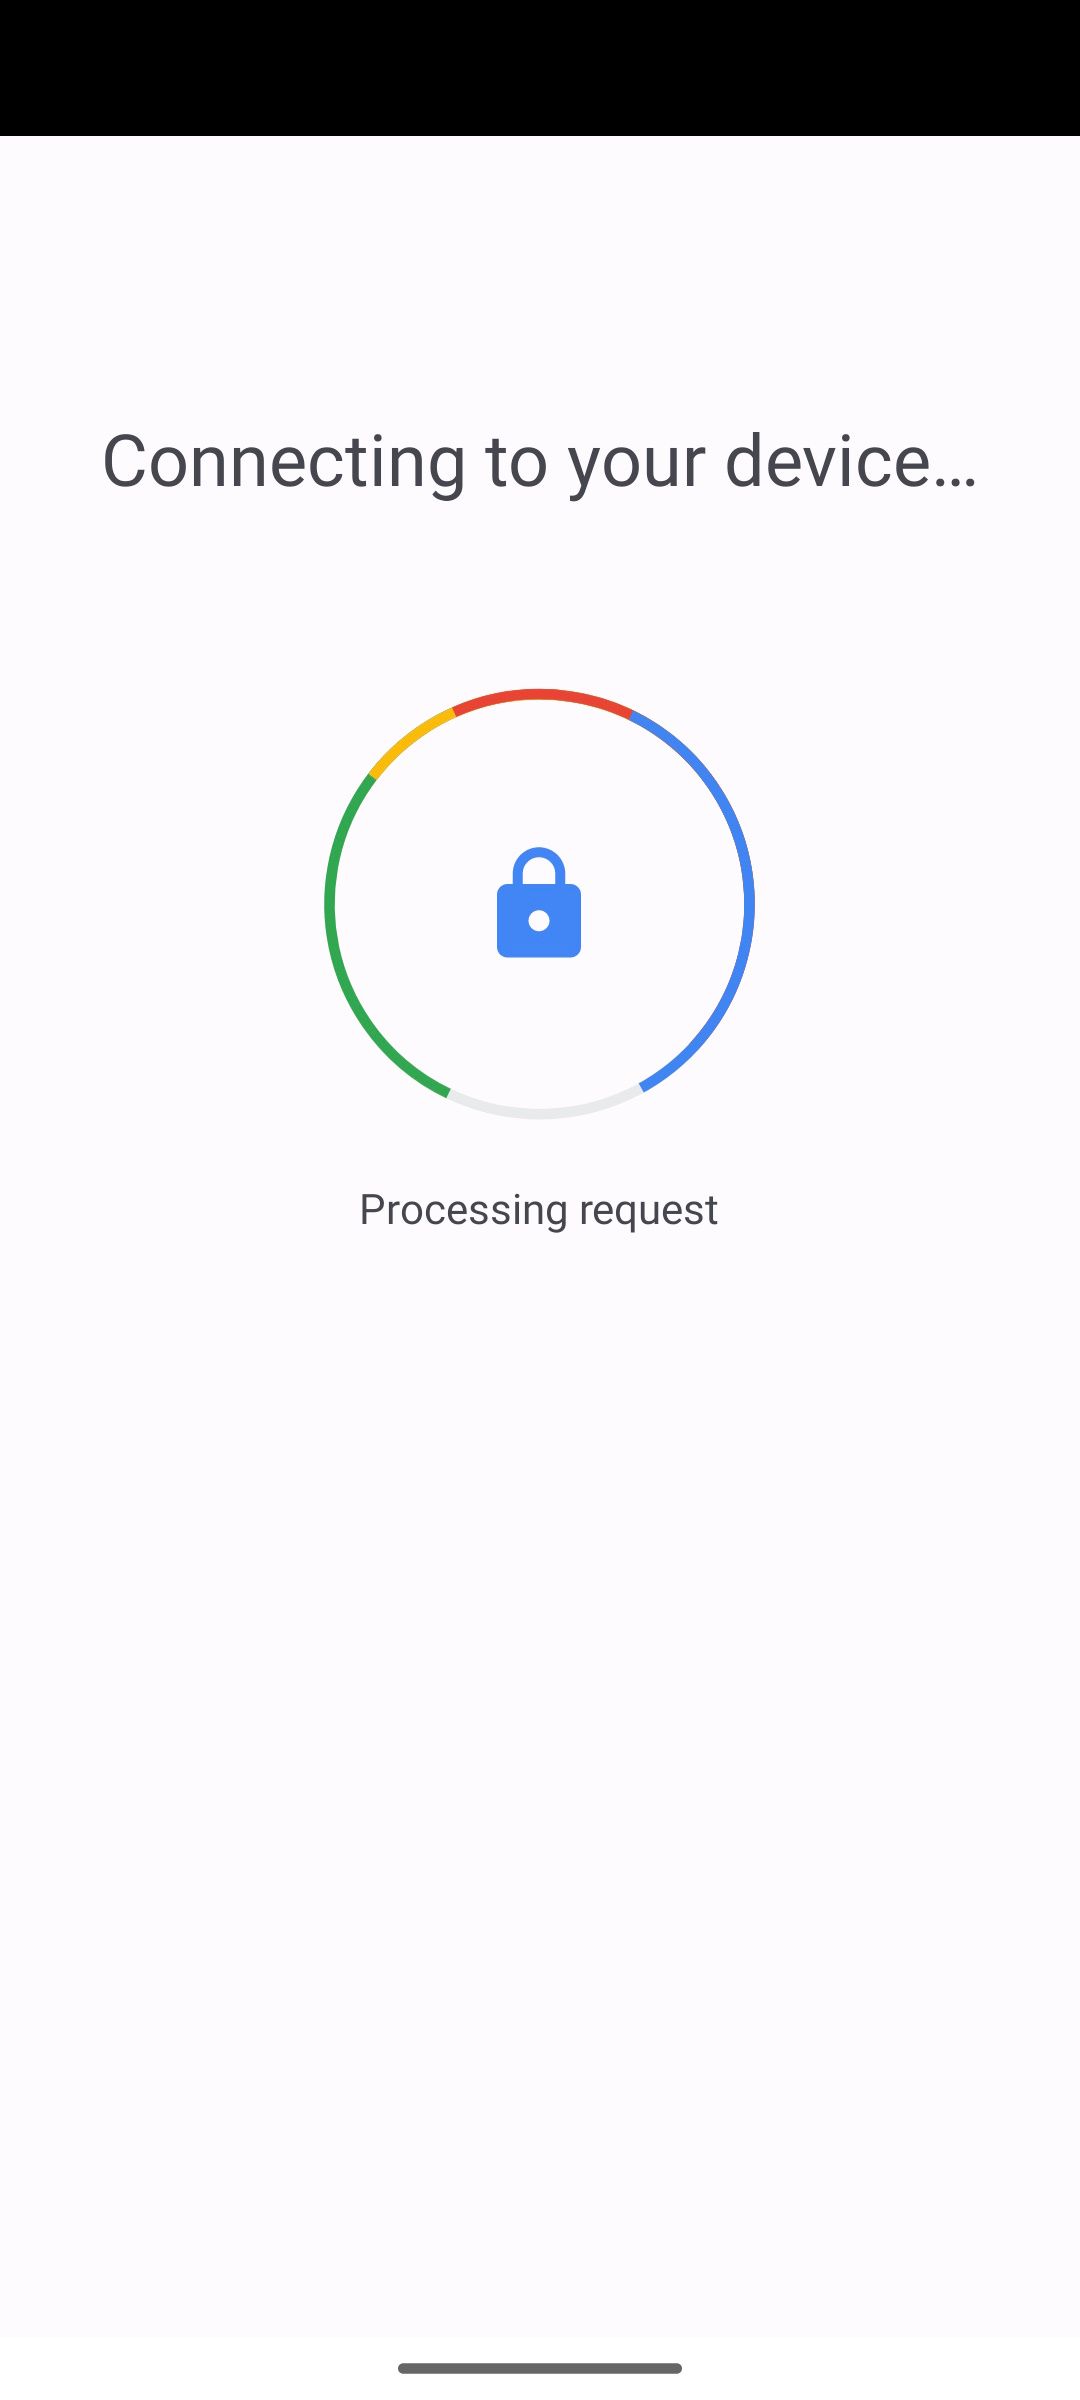 Google Passkey connecting to a device